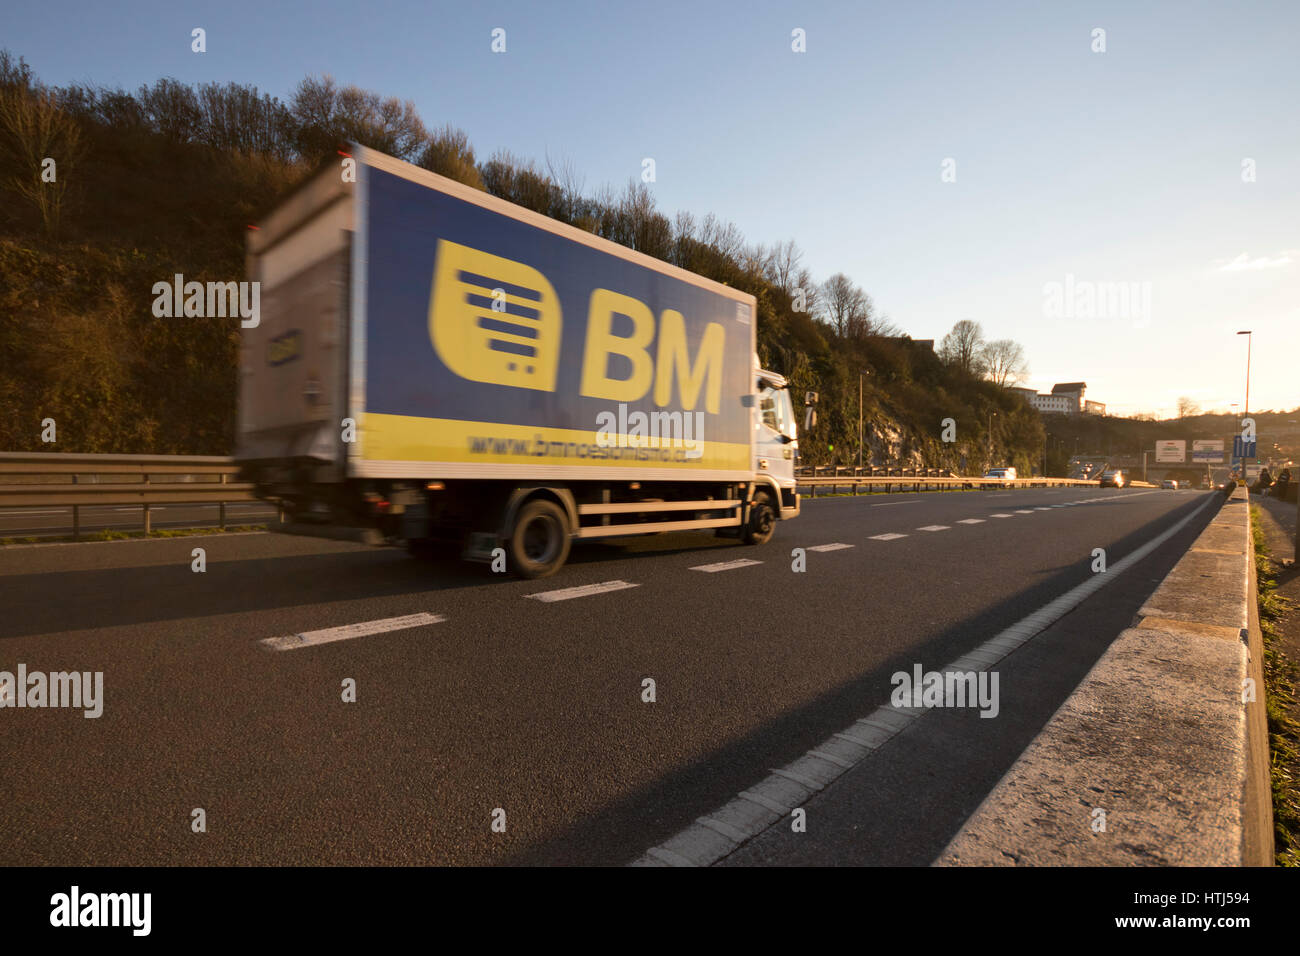 Moving BM supermarket delivery truck in a highway in Guipuzcoa (Basque country, Spain) 2017. Stock Photo